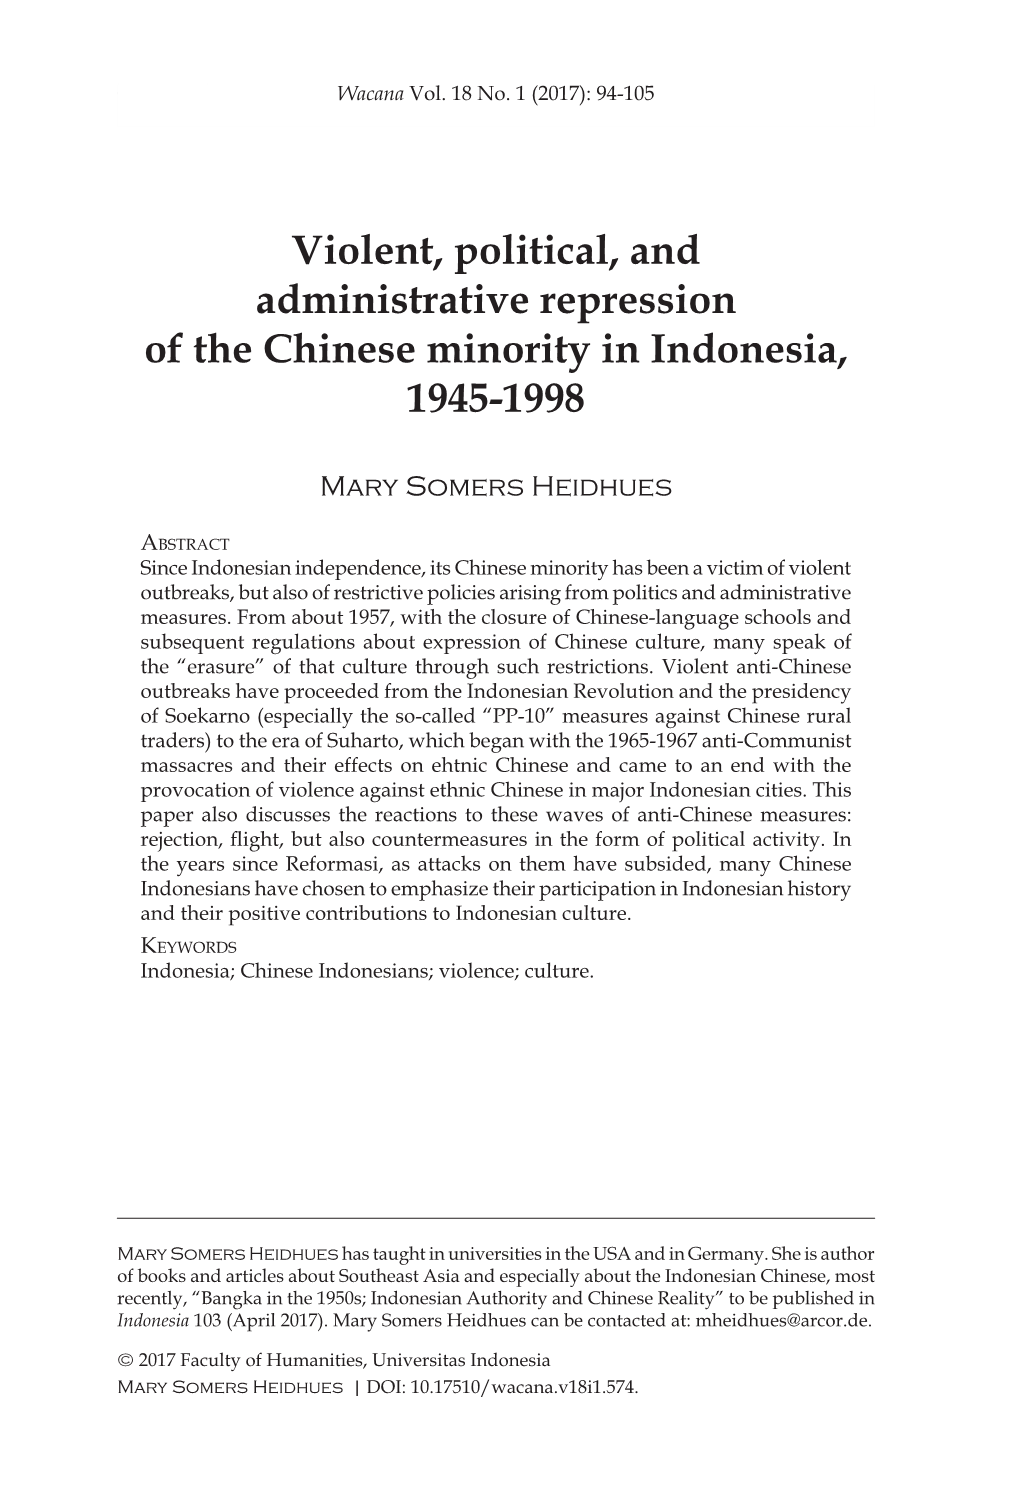 Violent, Political, and Administrative Repression of the Chinese Minority in Indonesia, 1945-1998